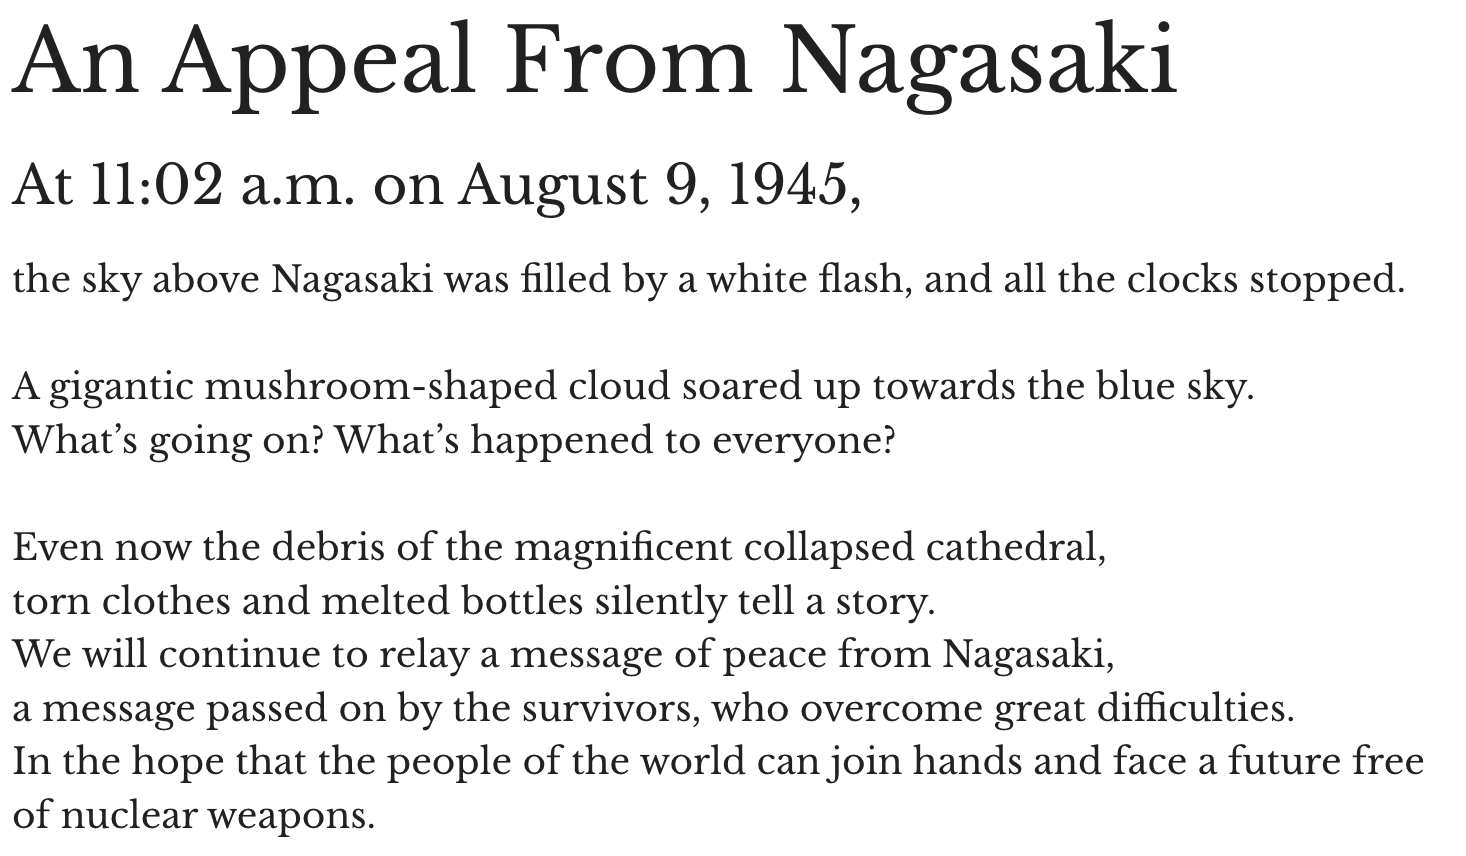 An Appeal From Nagasaki At 11:02 a.m. on August 9, 1945, the sky above Nagasaki was filled by a white flash, and all the clocks stopped. A gigantic mushroom-shaped cloud soared up towards the blue sky. What’s going on? What’s happened to everyone? Even now the debris of the magnificent collapsed cathedral,torn clothes and melted bottles silently tell a story. We will continue to relay a message of peace from Nagasaki, a message passed on by the survivors, who overcome great difficulties. In the hope that the people of the world can join hands and face a future free of nuclear weapons.